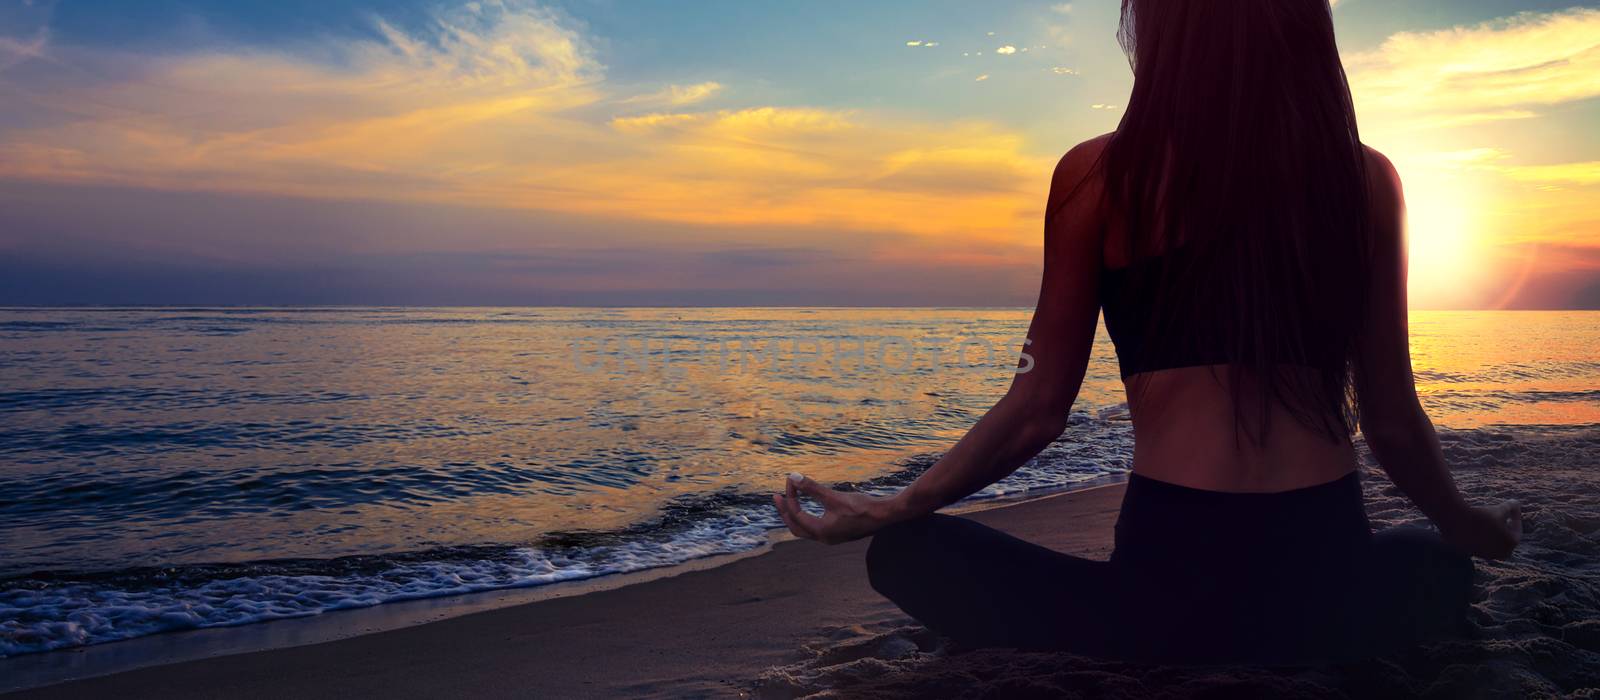 Yoga meditation banner - woman in a lotus pose on a seaside beach on a background of a picturesque sunset landscape (copy space)